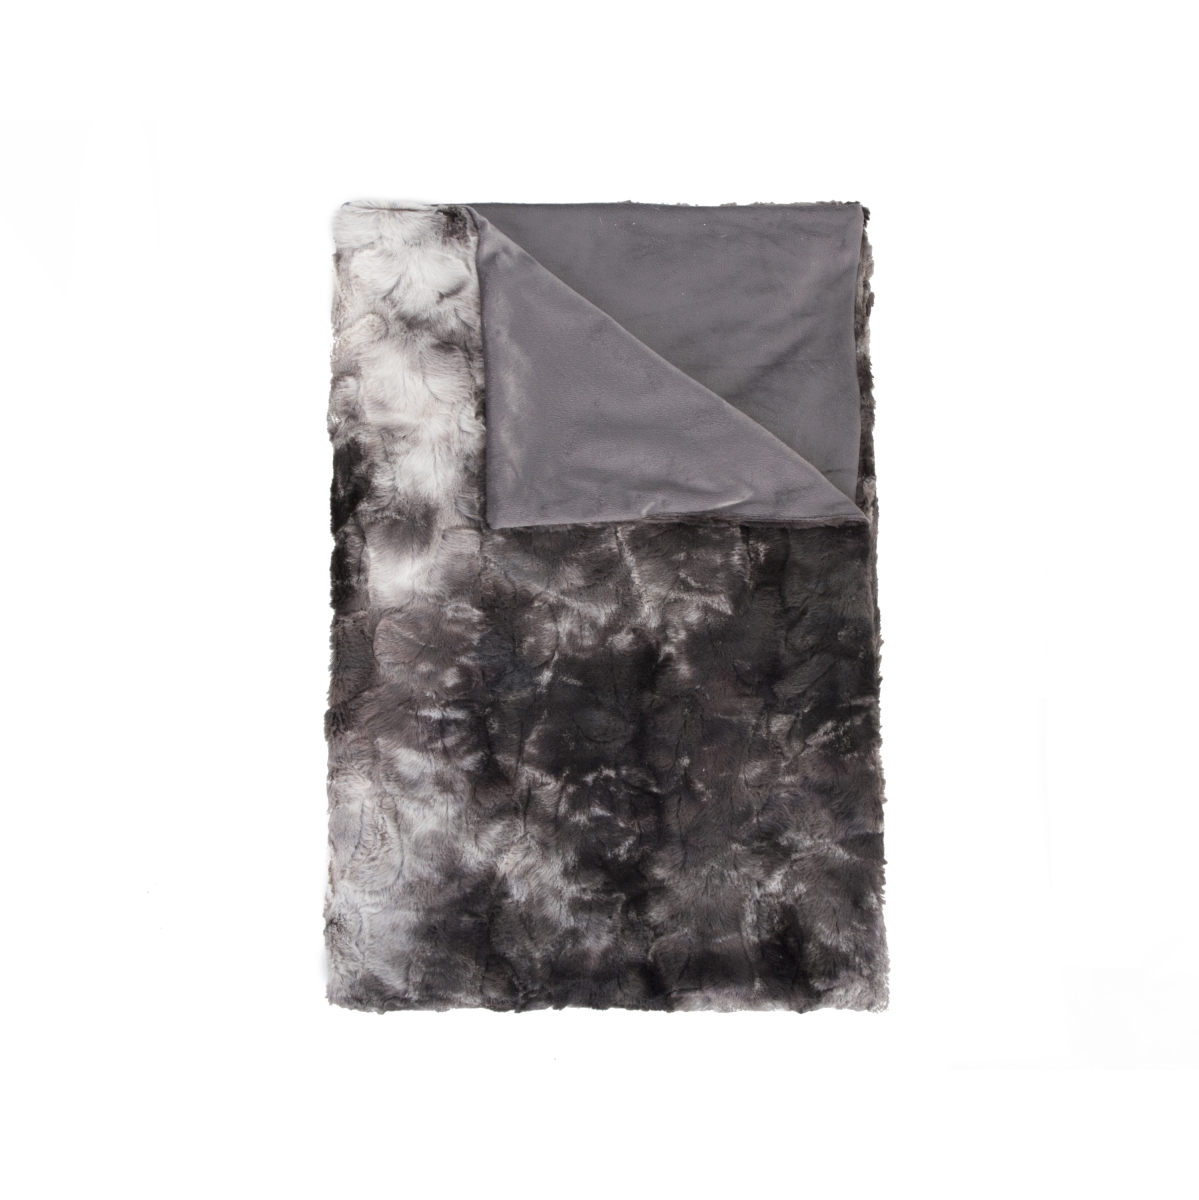 LUXE 331410049308 Luxe Home Decor Classic Faux Fur Throw   1-Piece   Naples charcoal/grey   50&'x60&'